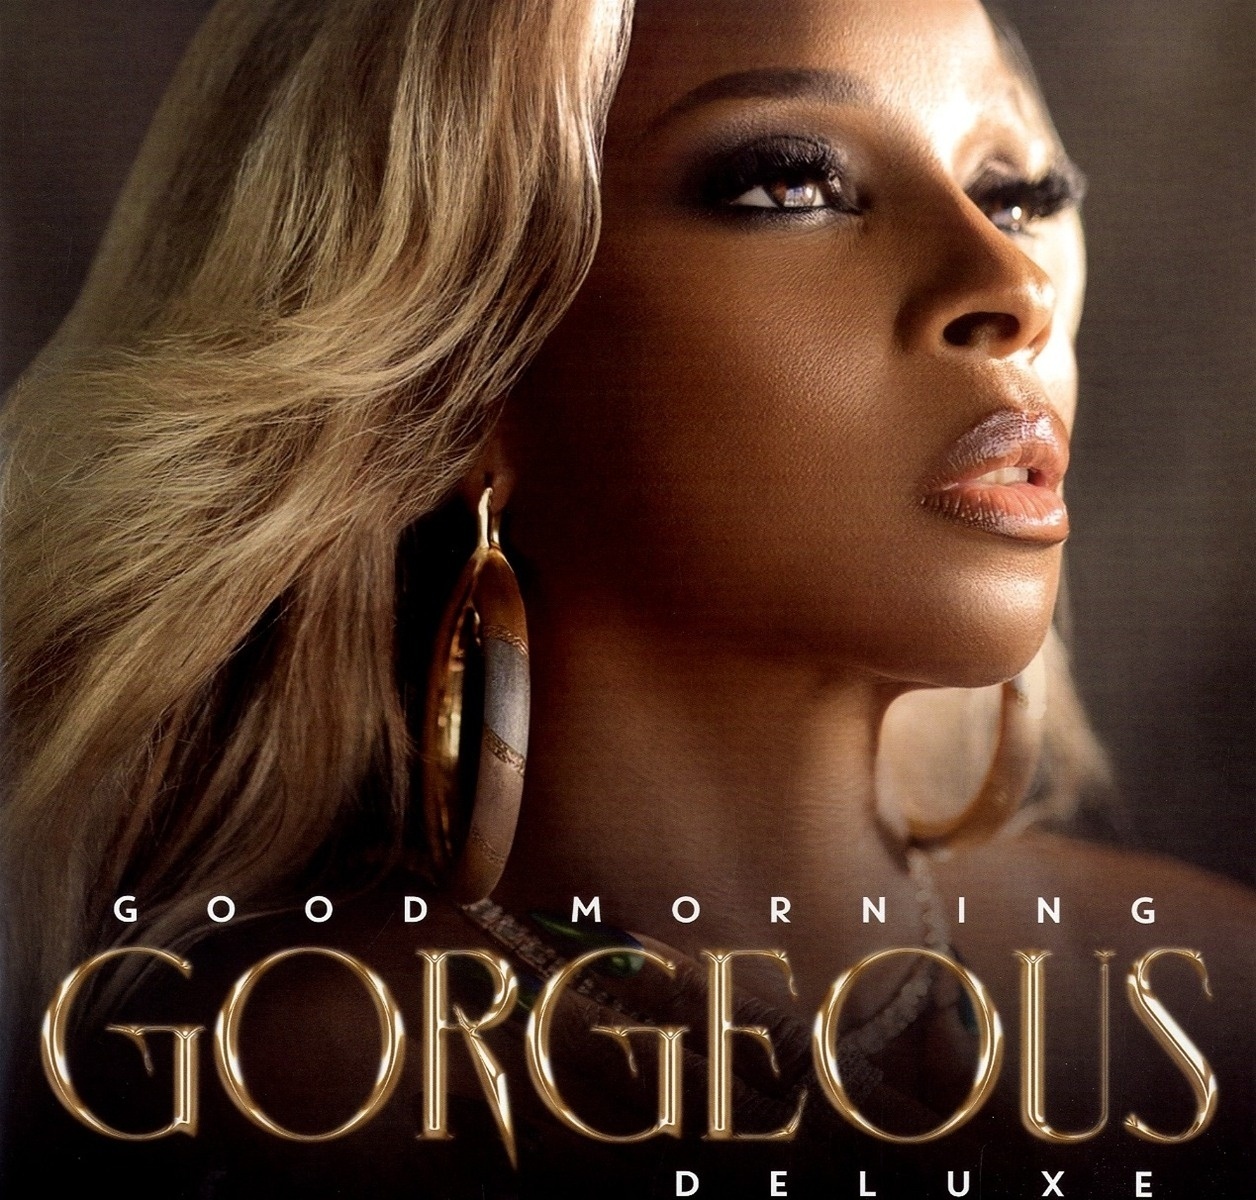 Good Morning Gorgeous (Deluxe Edition) - Mary J. Blige. (LP)